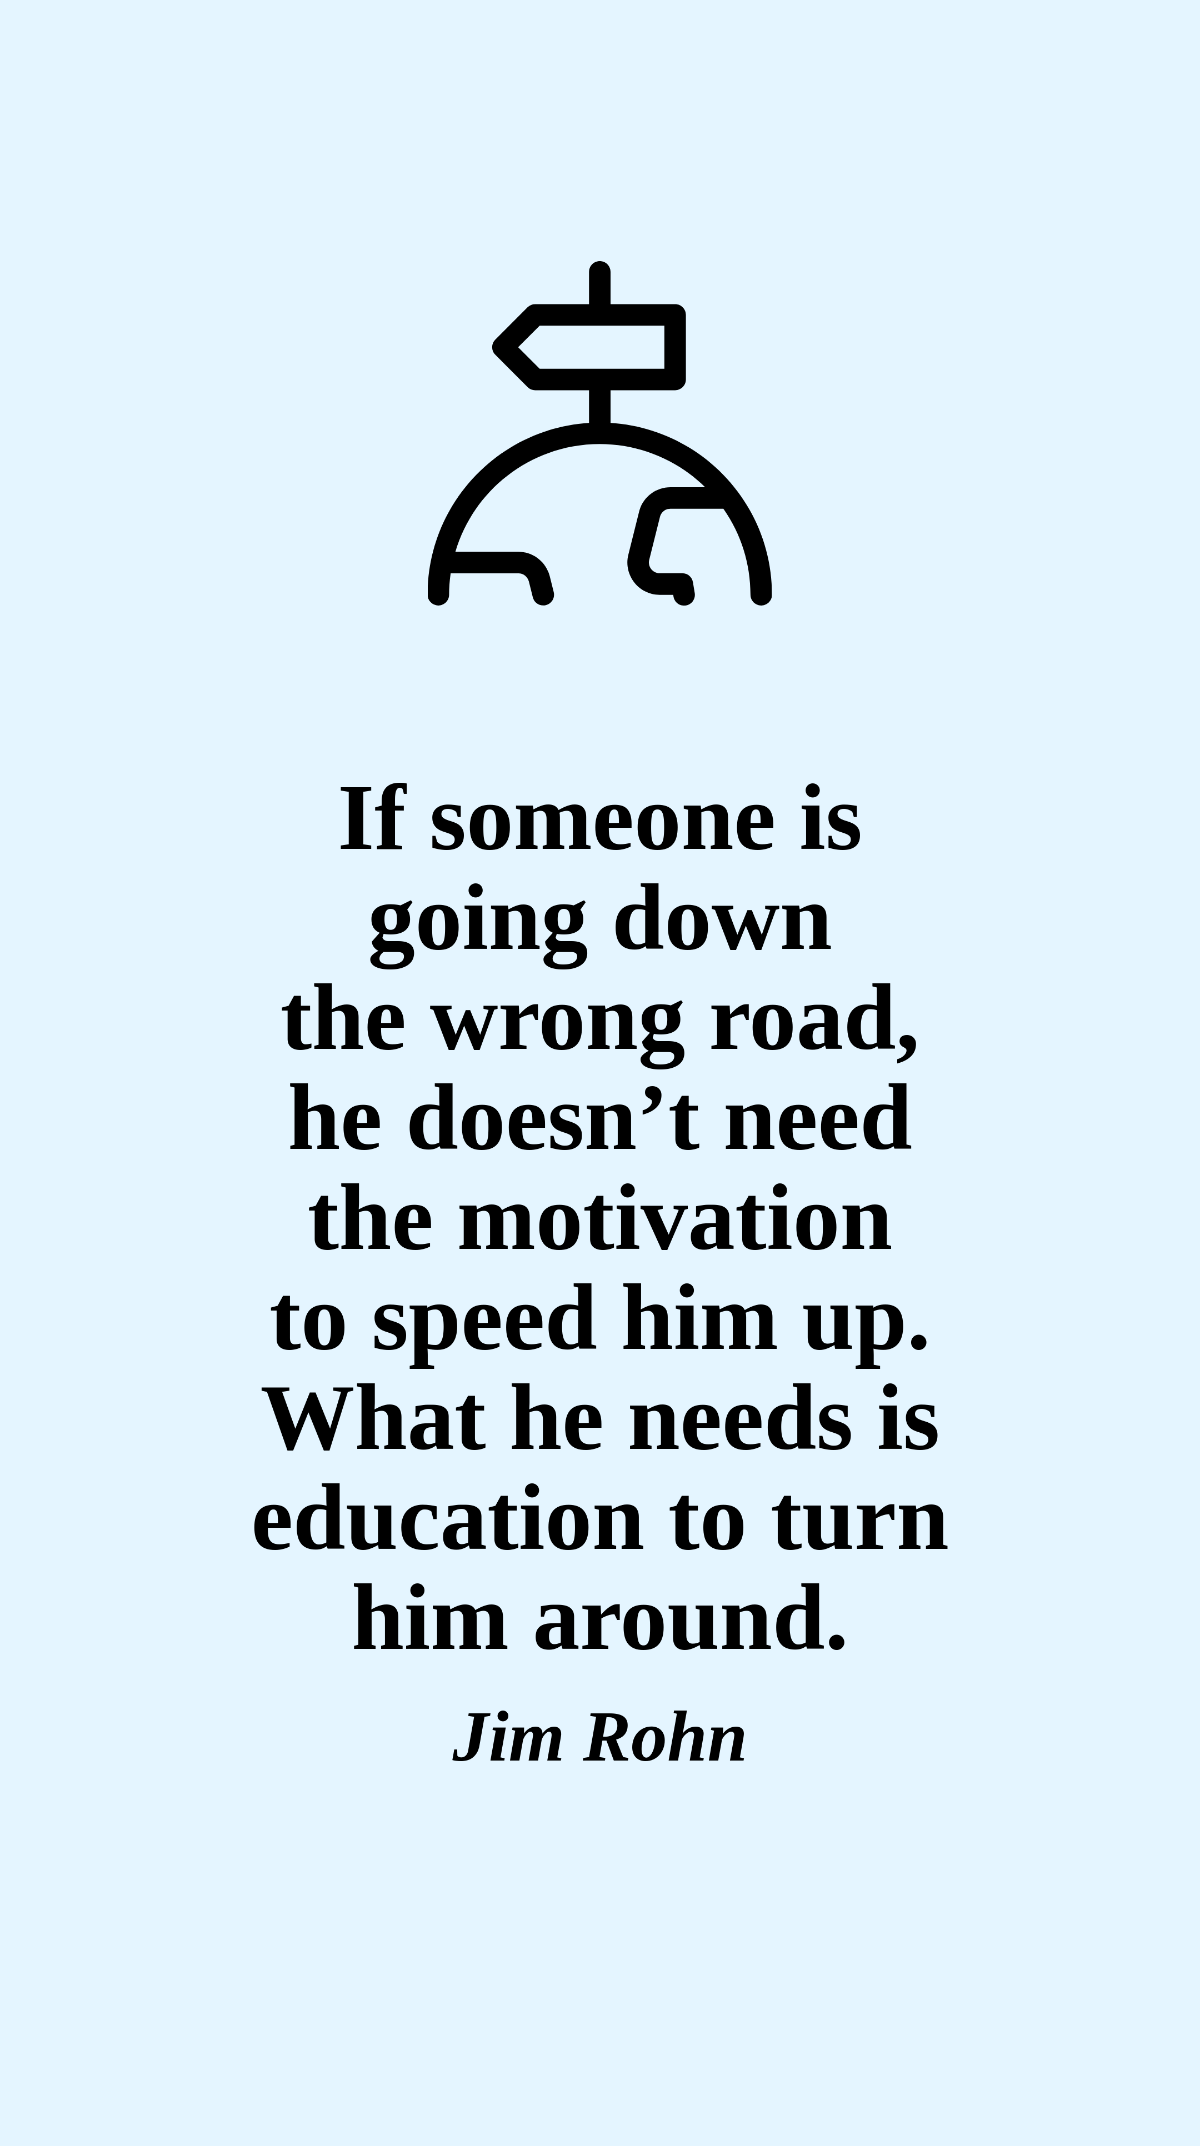 Free Jim Rohn - If someone is going down the wrong road, he doesn’t need the motivation to speed him up. What he needs is education to turn him around. Template